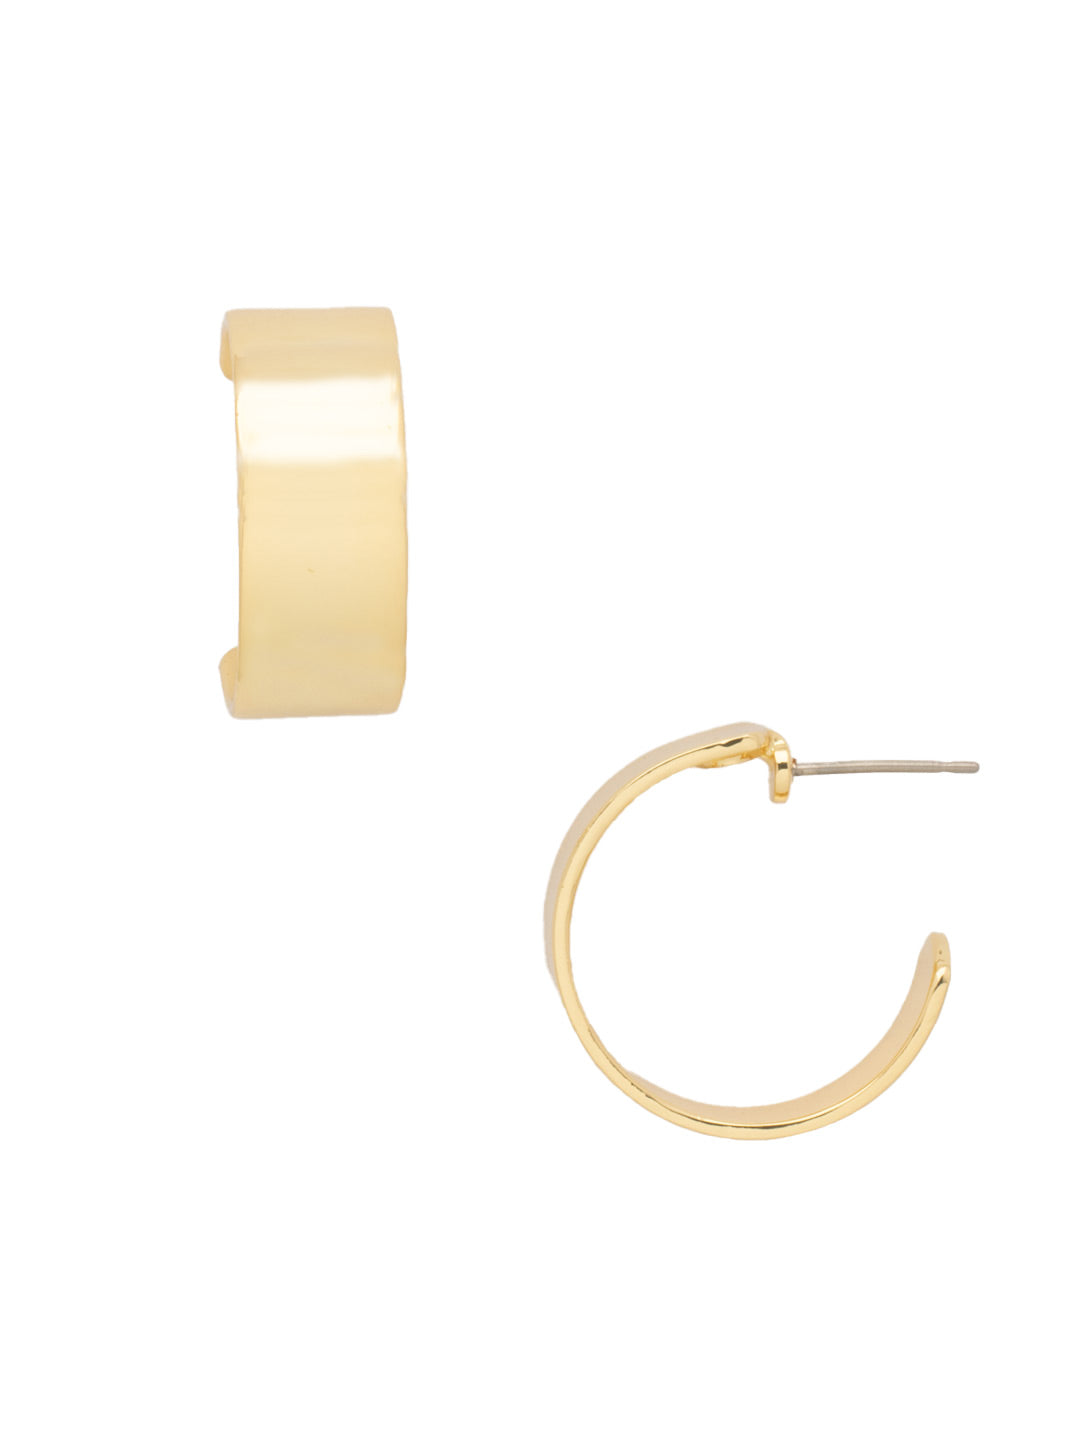 Dani Hoop Earrings - EFM20BGMTL - <p>The Dani Hoop Earrings feature a classic metal flat domed hoop on a post From Sorrelli's Bare Metallic collection in our Bright Gold-tone finish.</p>